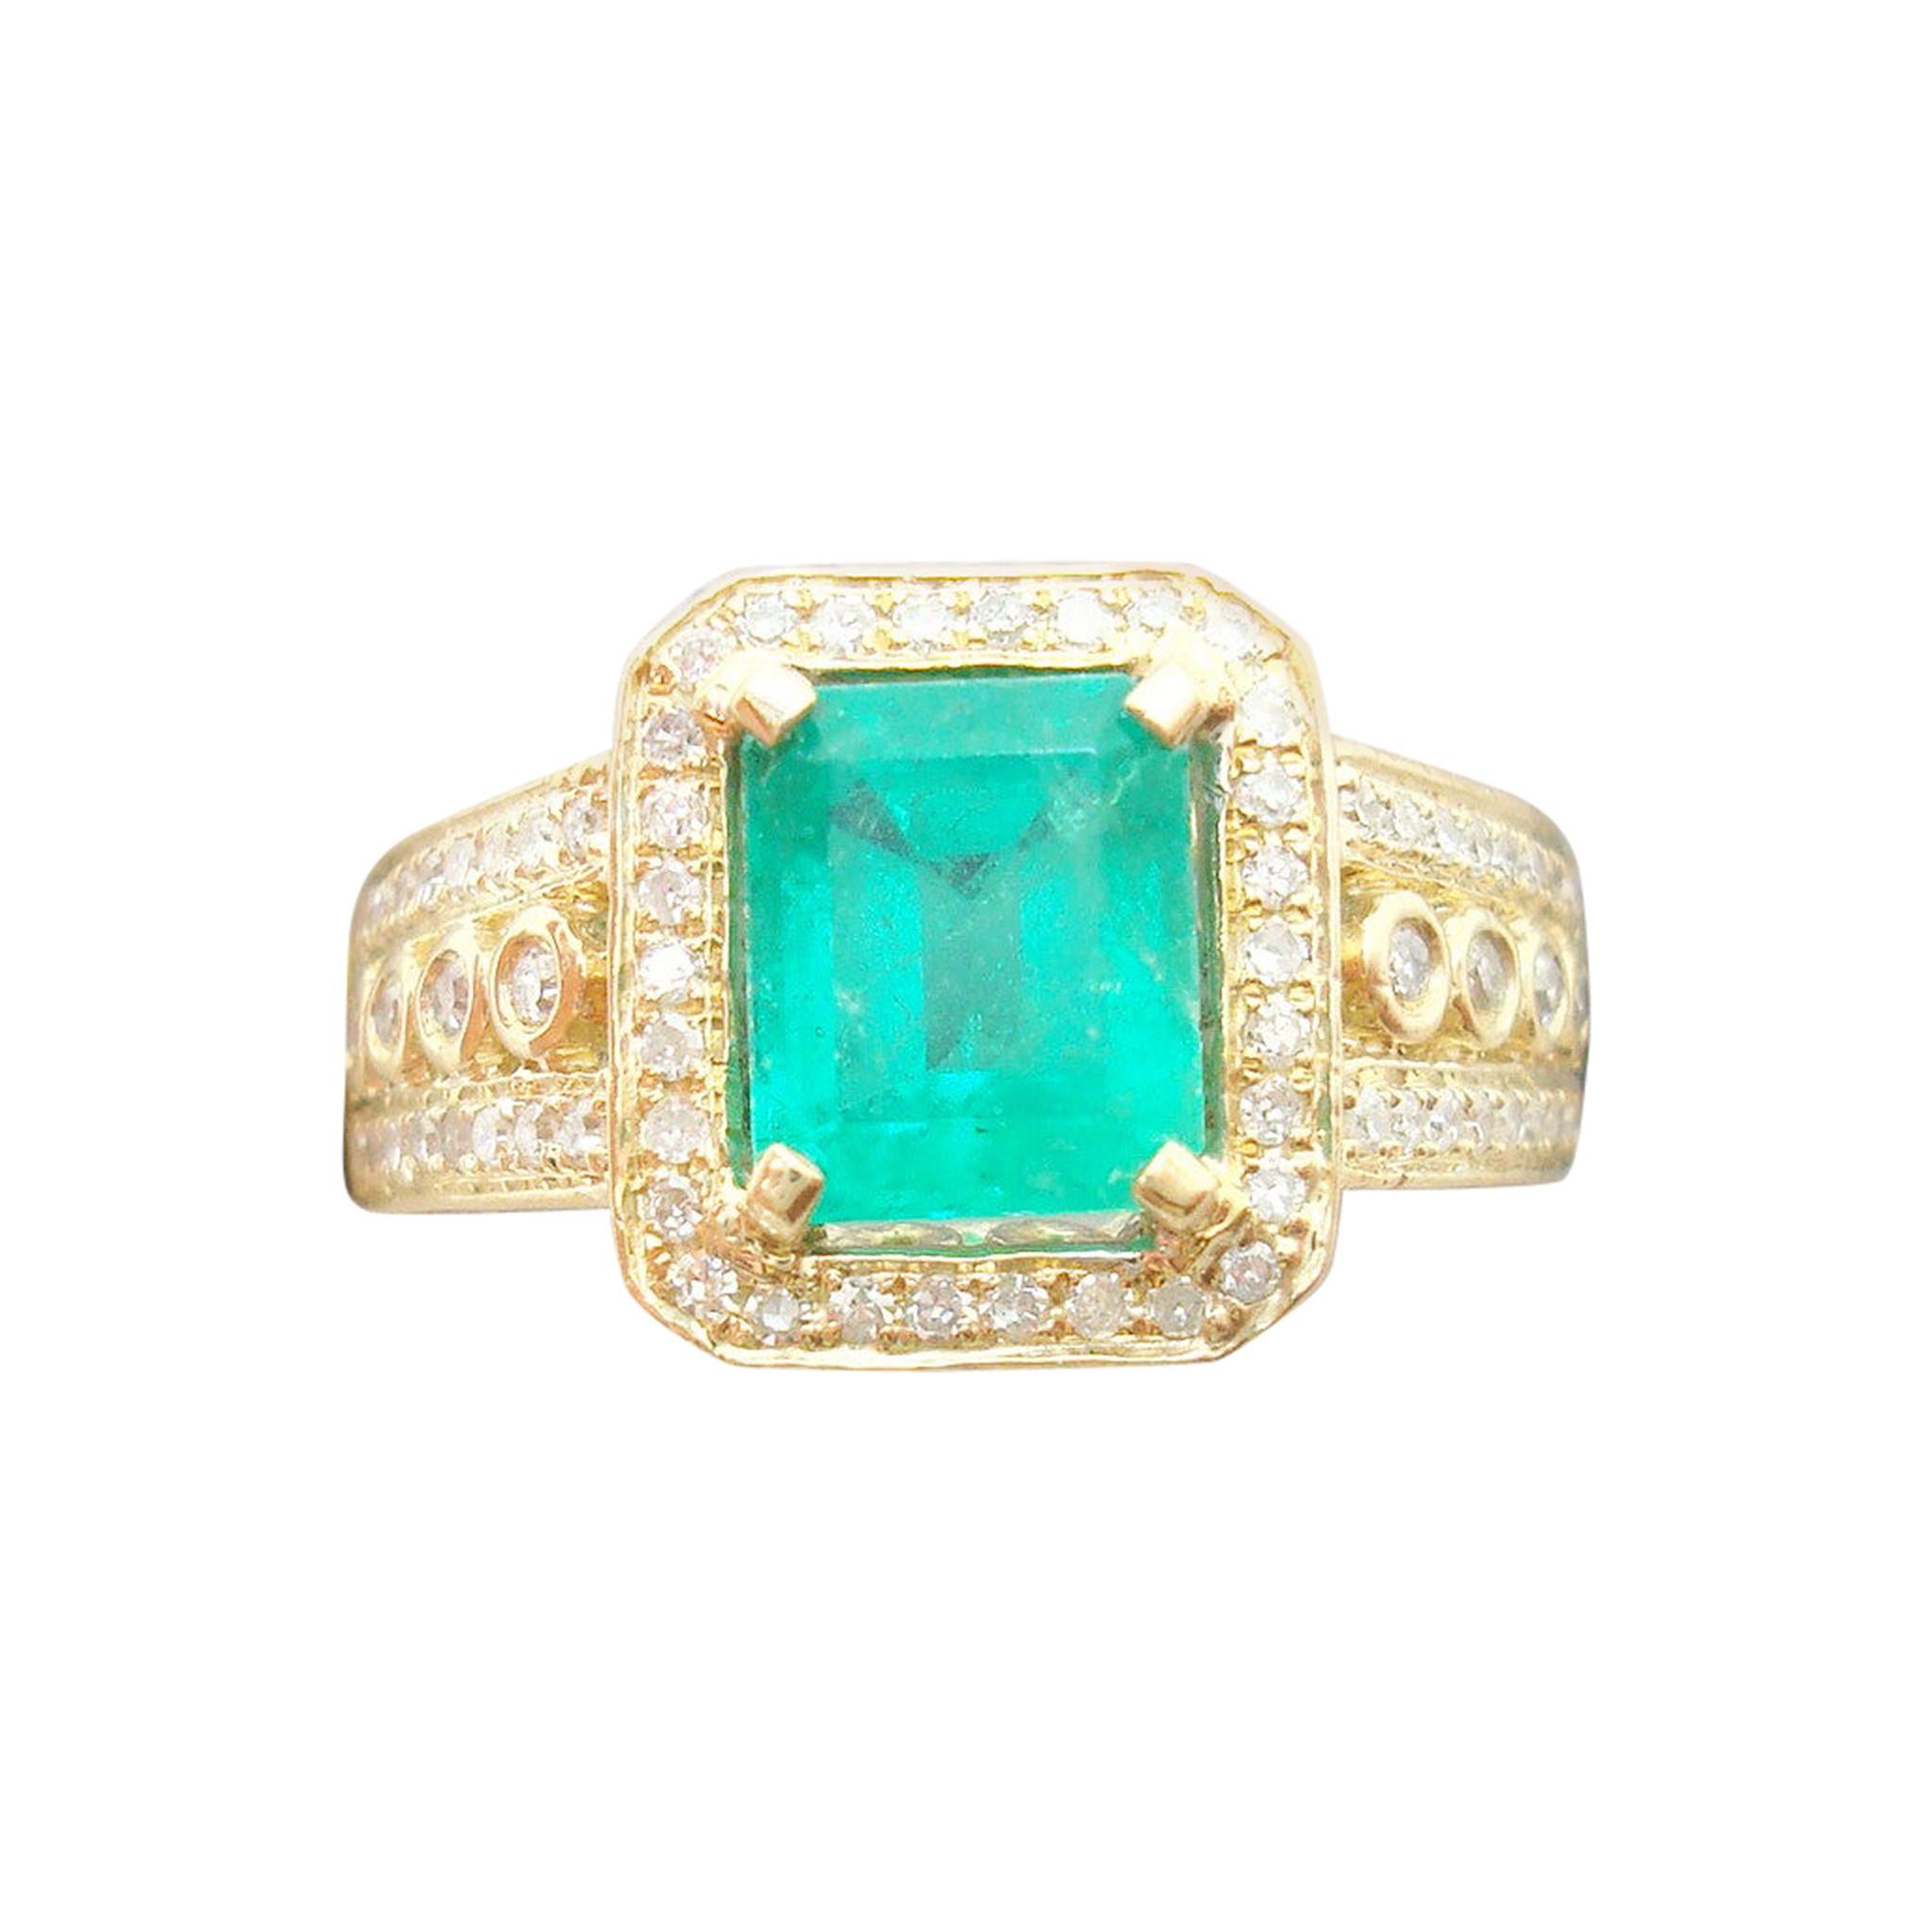 10k Gold 1.62ct Genuine Natural Emerald Ring with 1/4ct Diamonds '#J2604' For Sale